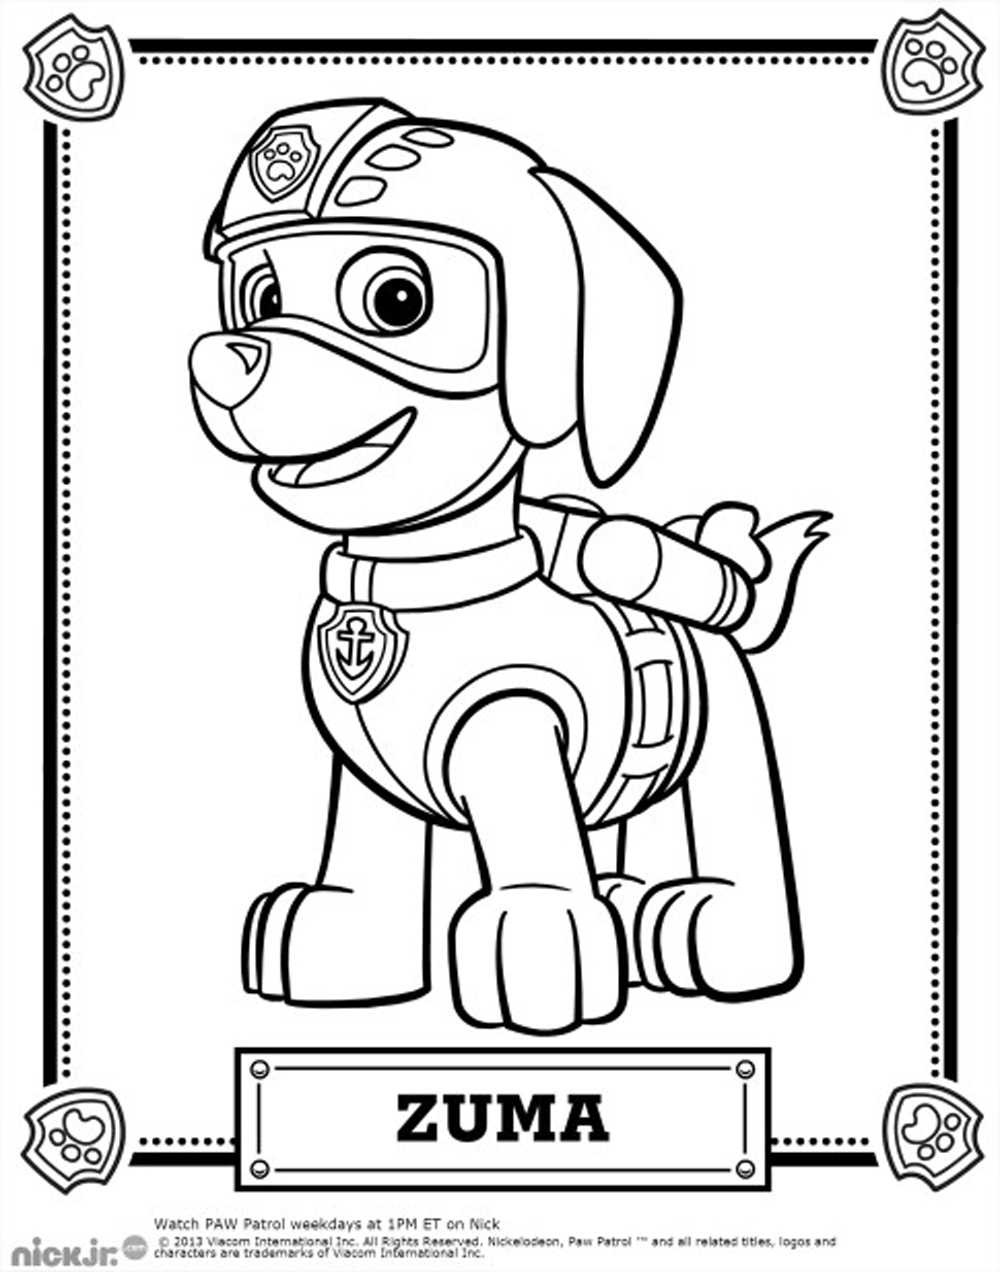 Paw Patrol Coloring Pages FREE Printable 139